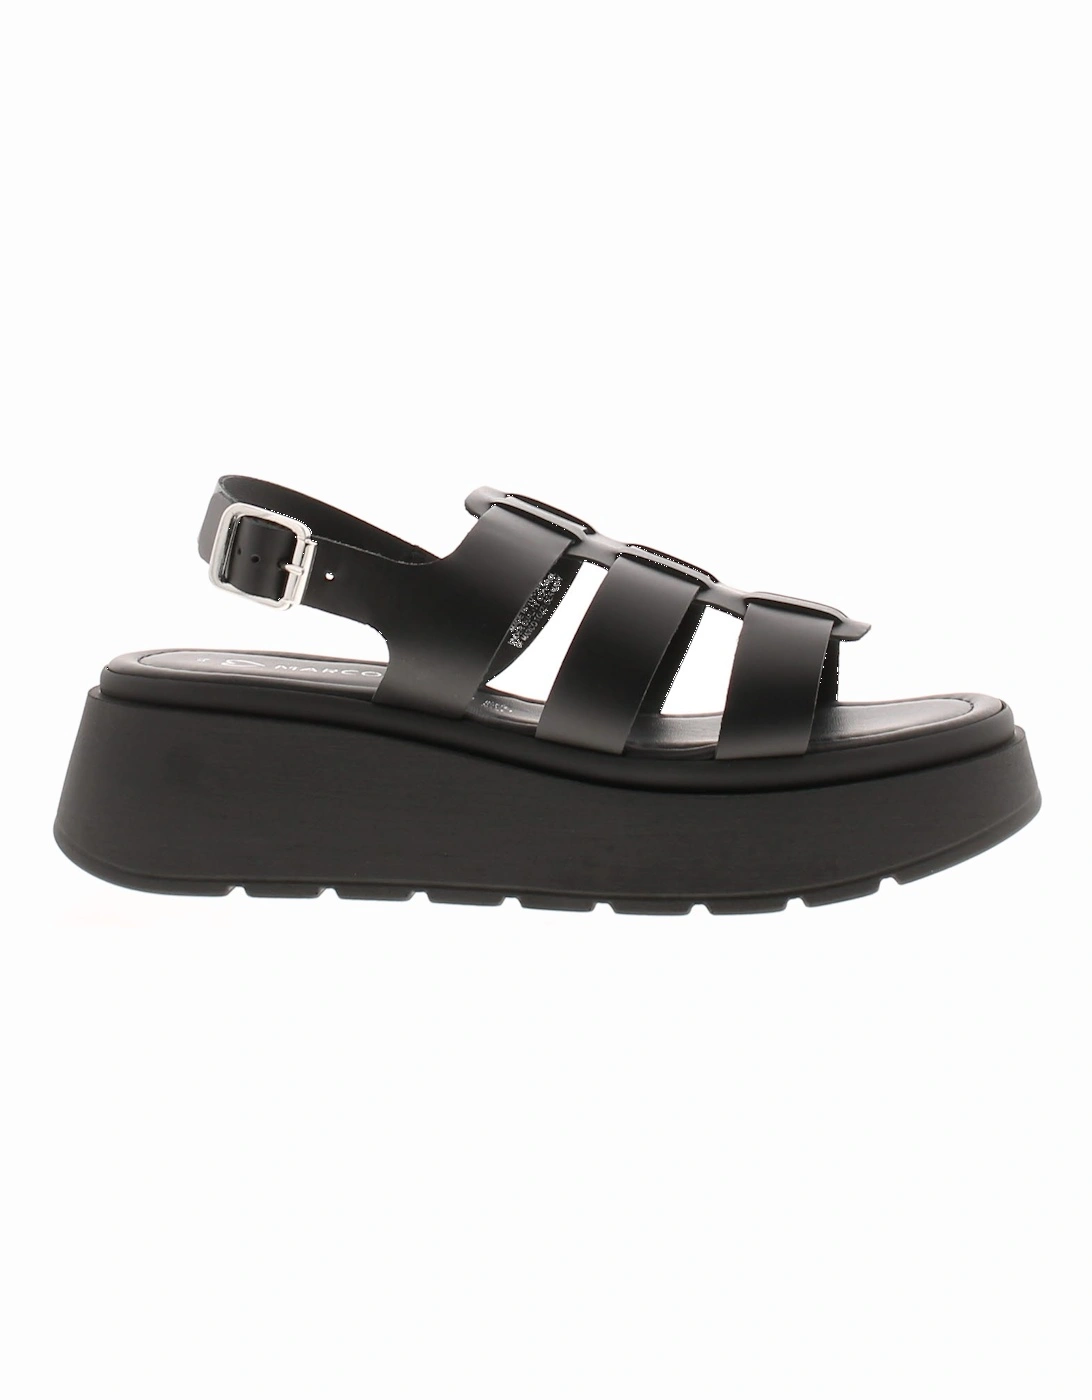 Womens Sandals Wedge Marin Leather Buckle black UK Size